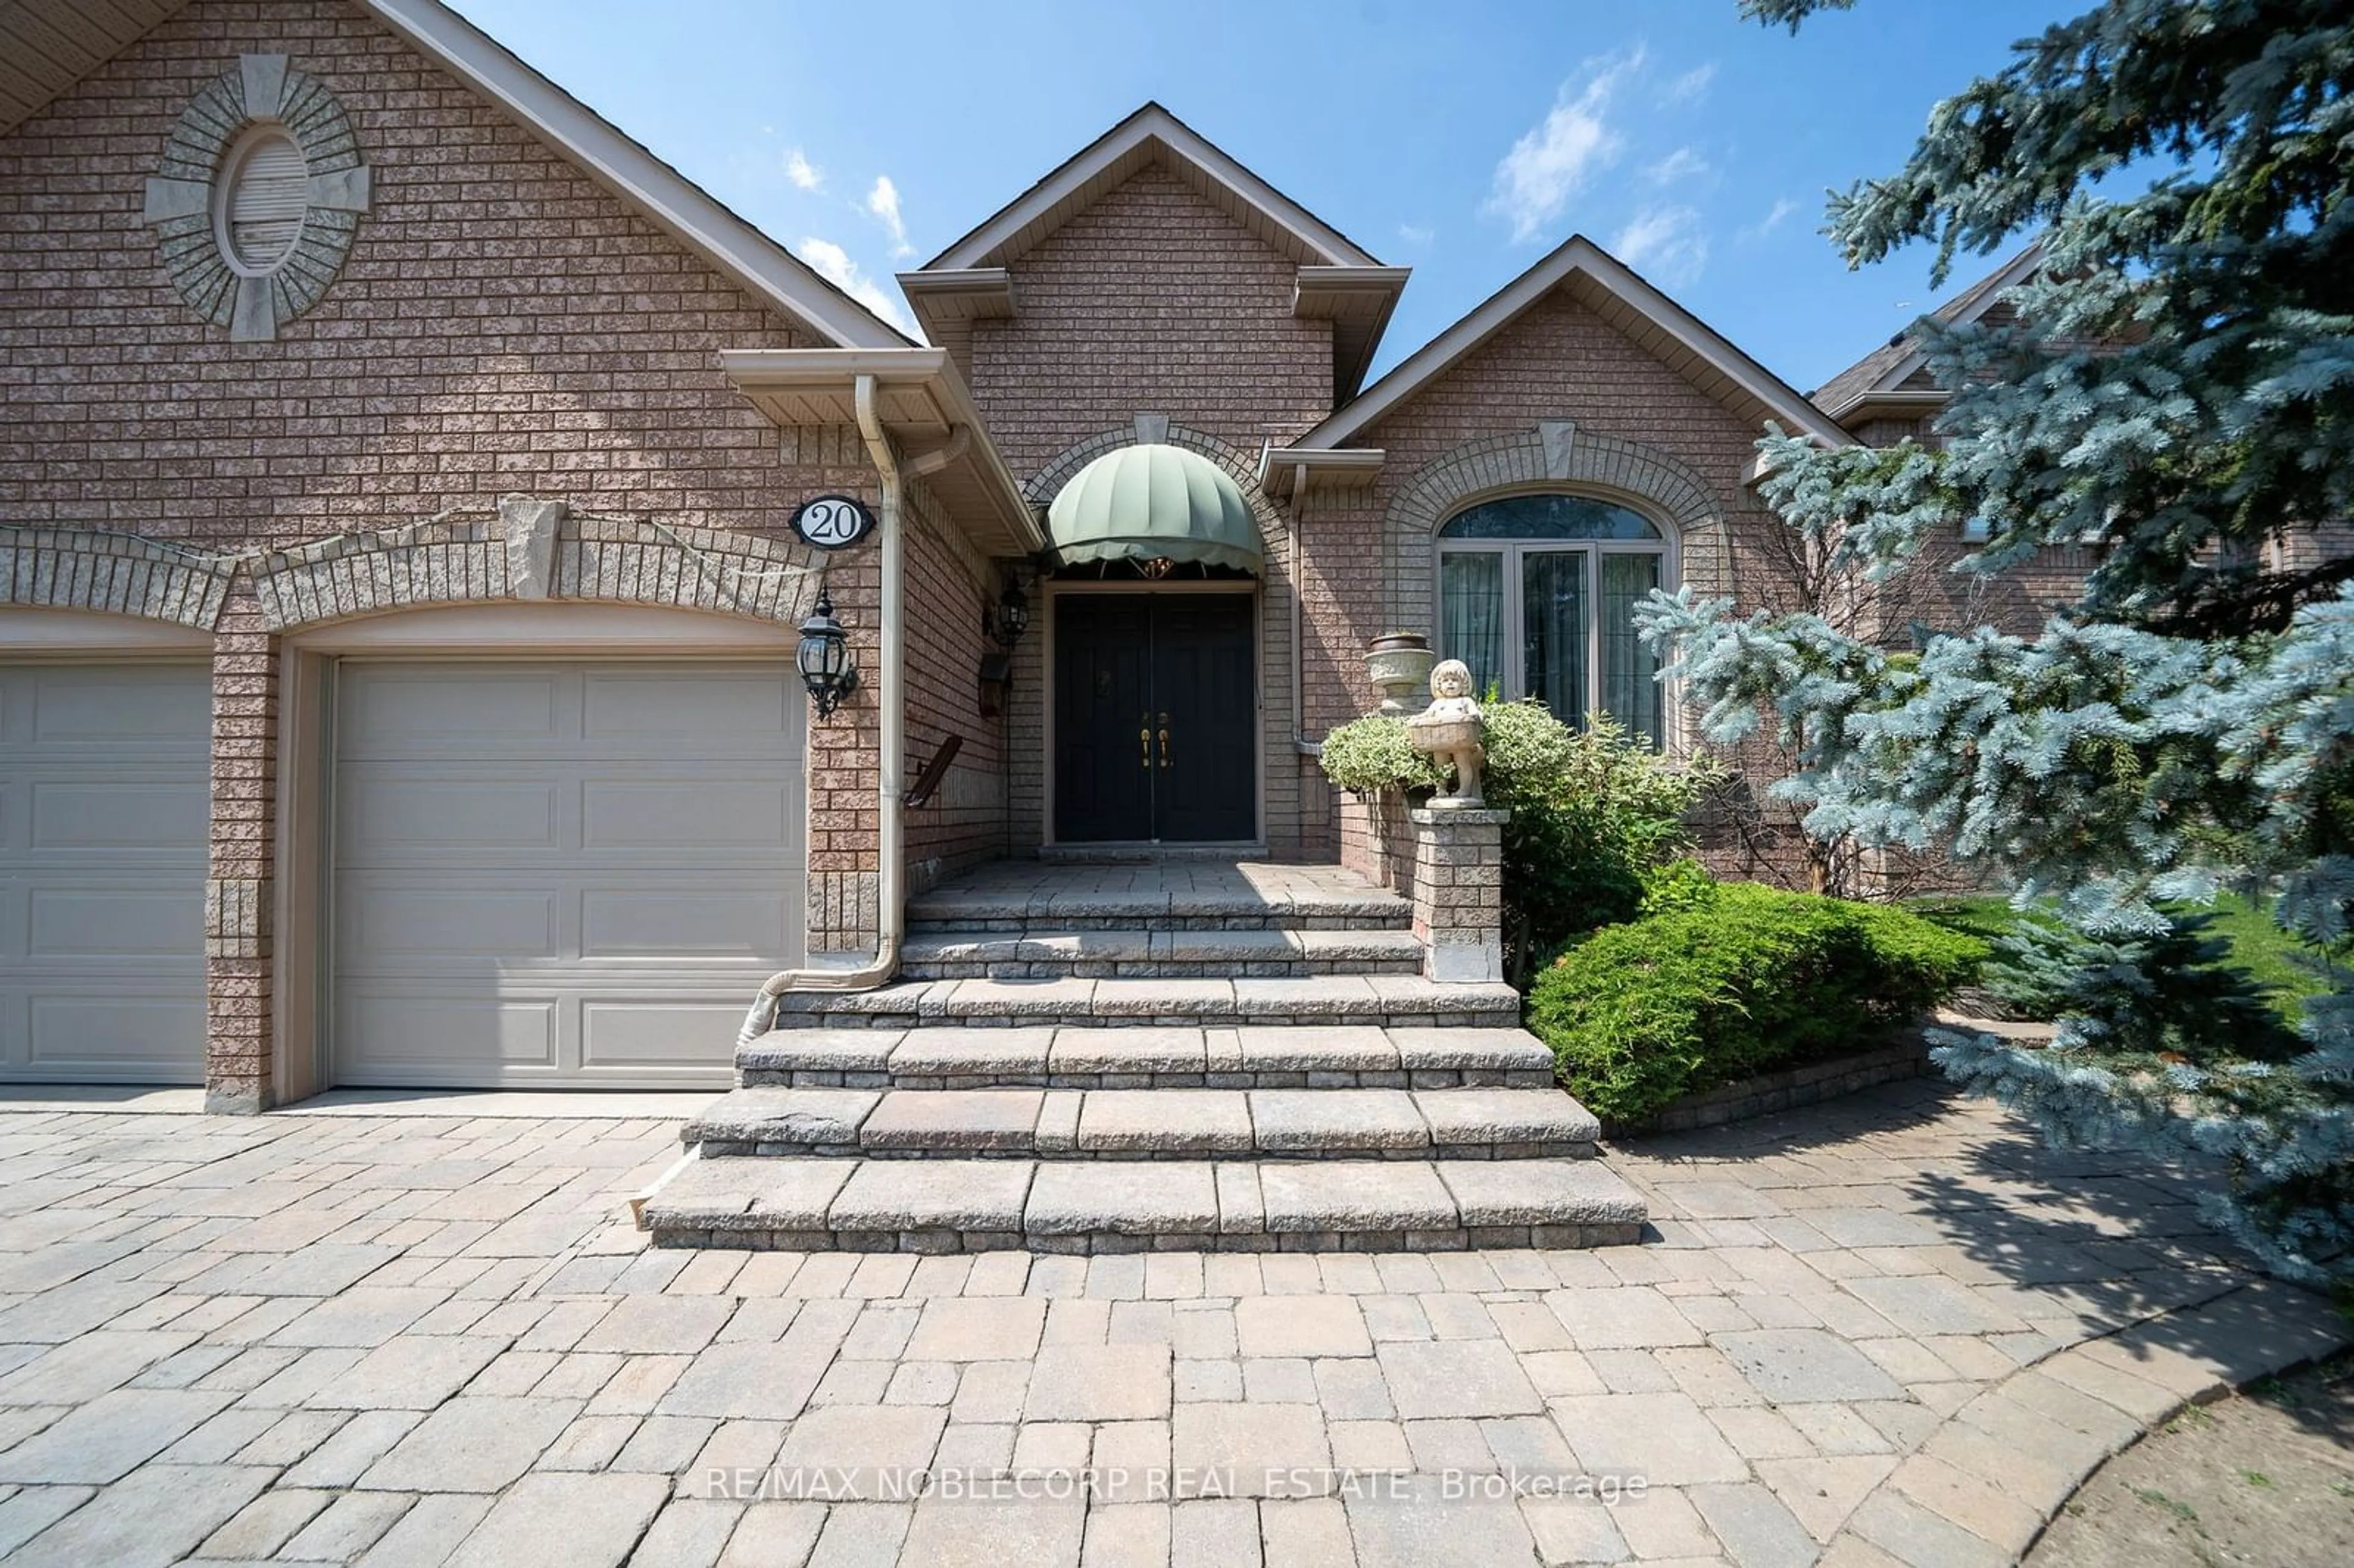 Home with brick exterior material for 20 Helmsdale Ave, Vaughan Ontario L6A 2G5